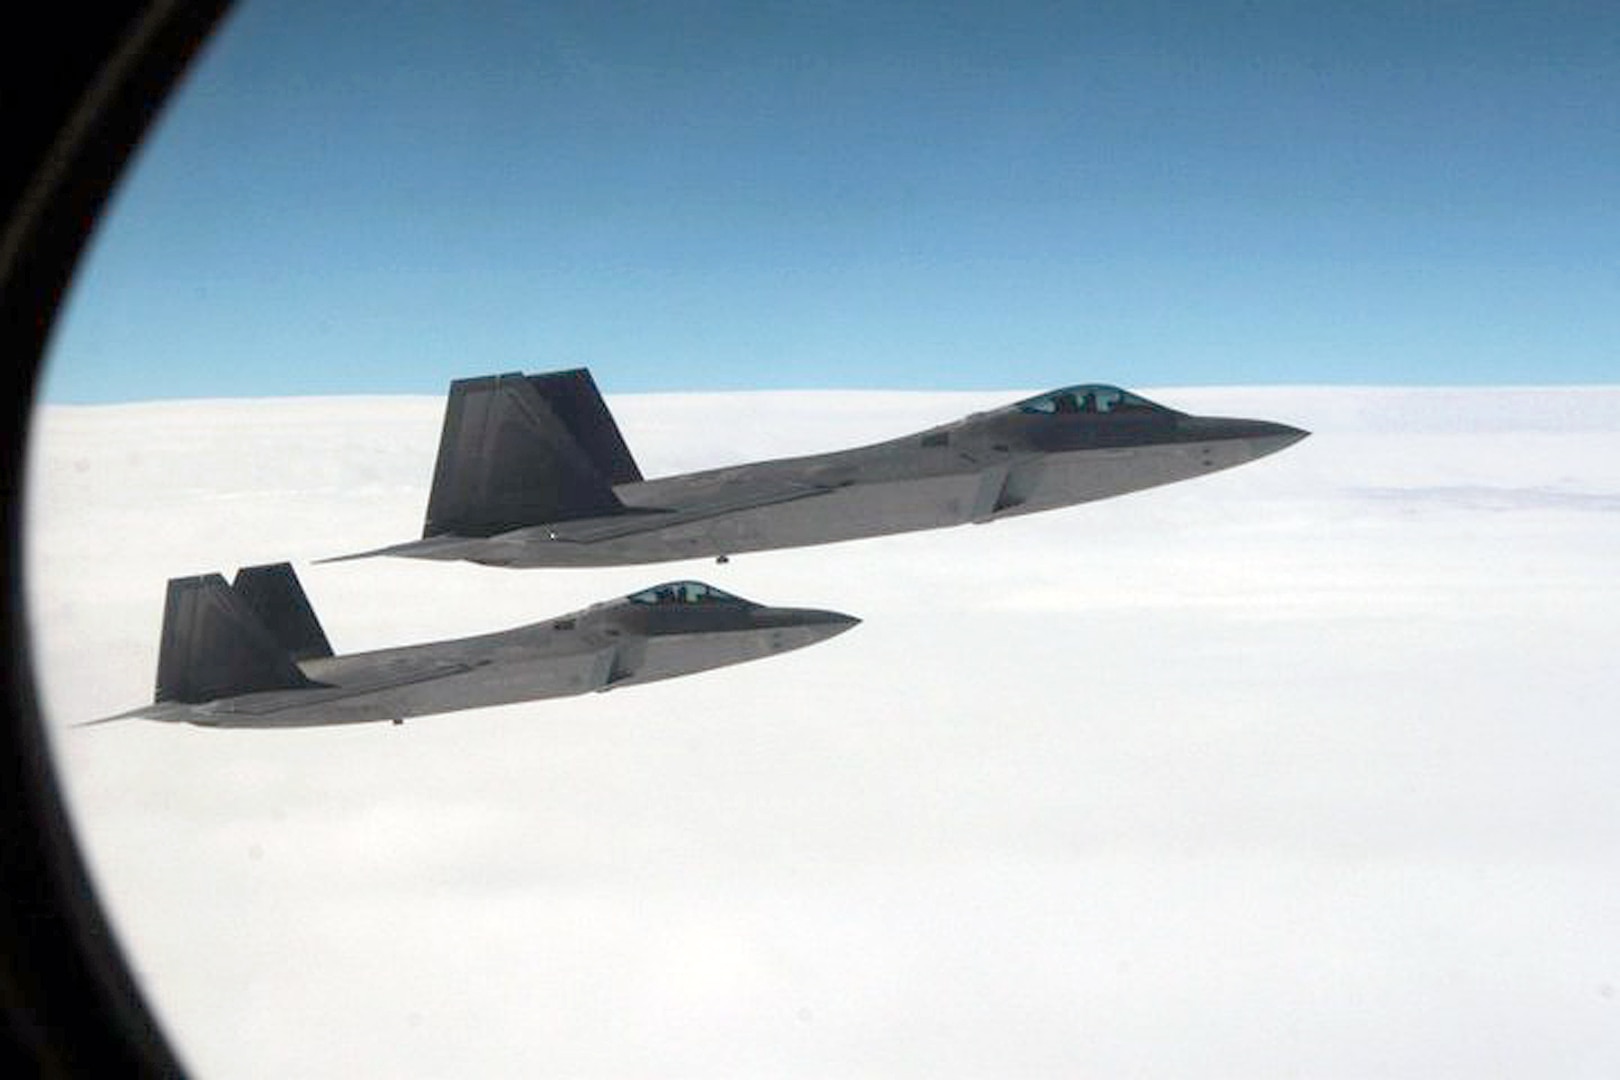 OVER THE PACIFIC OCEAN - A pair of F-22 Raptor fighters intercept Fencing 1220, the target of interest for Exercise VIGILANT EAGLE, shortly after take-off, Aug. 8. VIGILANT EAGLE is a cooperative exercise involving the North American Aerospace Defense Command and the Russian Air Force. The exercise scenario creates a situation that requires both the Russian Air Force and NORAD to launch or divert fighter aircraft to investigate and follow a "hijacked" airliner. The exercise focuses on shadowing and the cooperative hand-off of the monitored aircraft between fighters of the participating nations. 

(U.S. Army photo by Maj. Mike Humphreys) 

